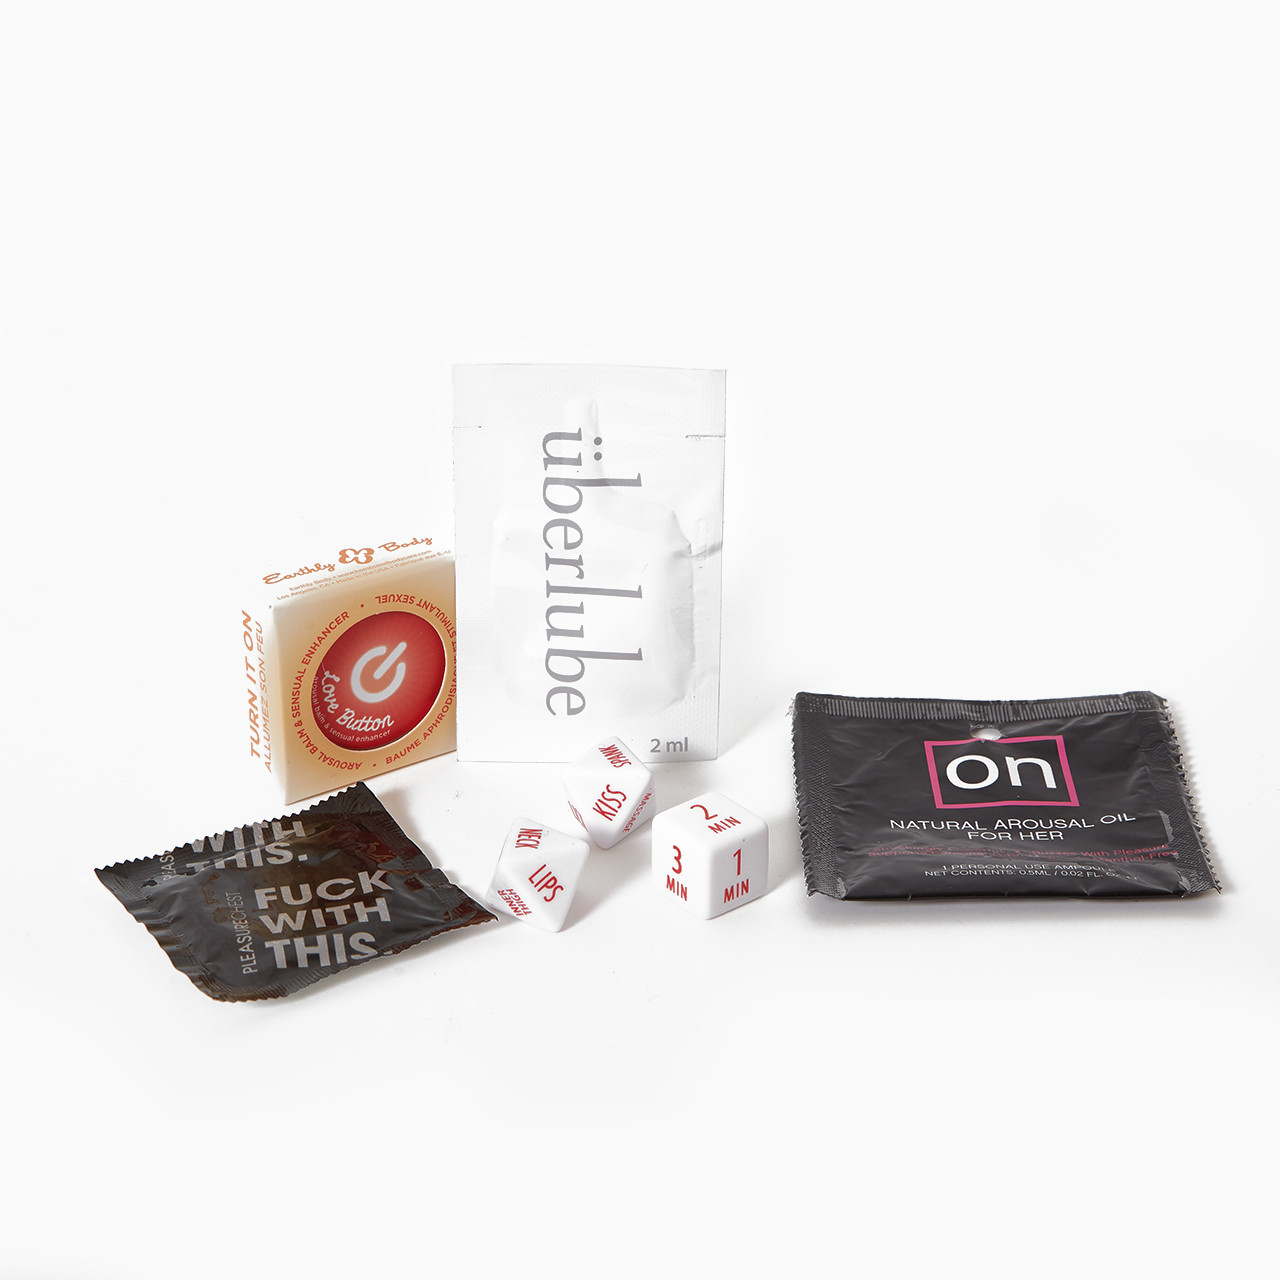 Senses Overload Couples Sex Toy Kit with arousal oil, balm, dice, lubricant and condoms